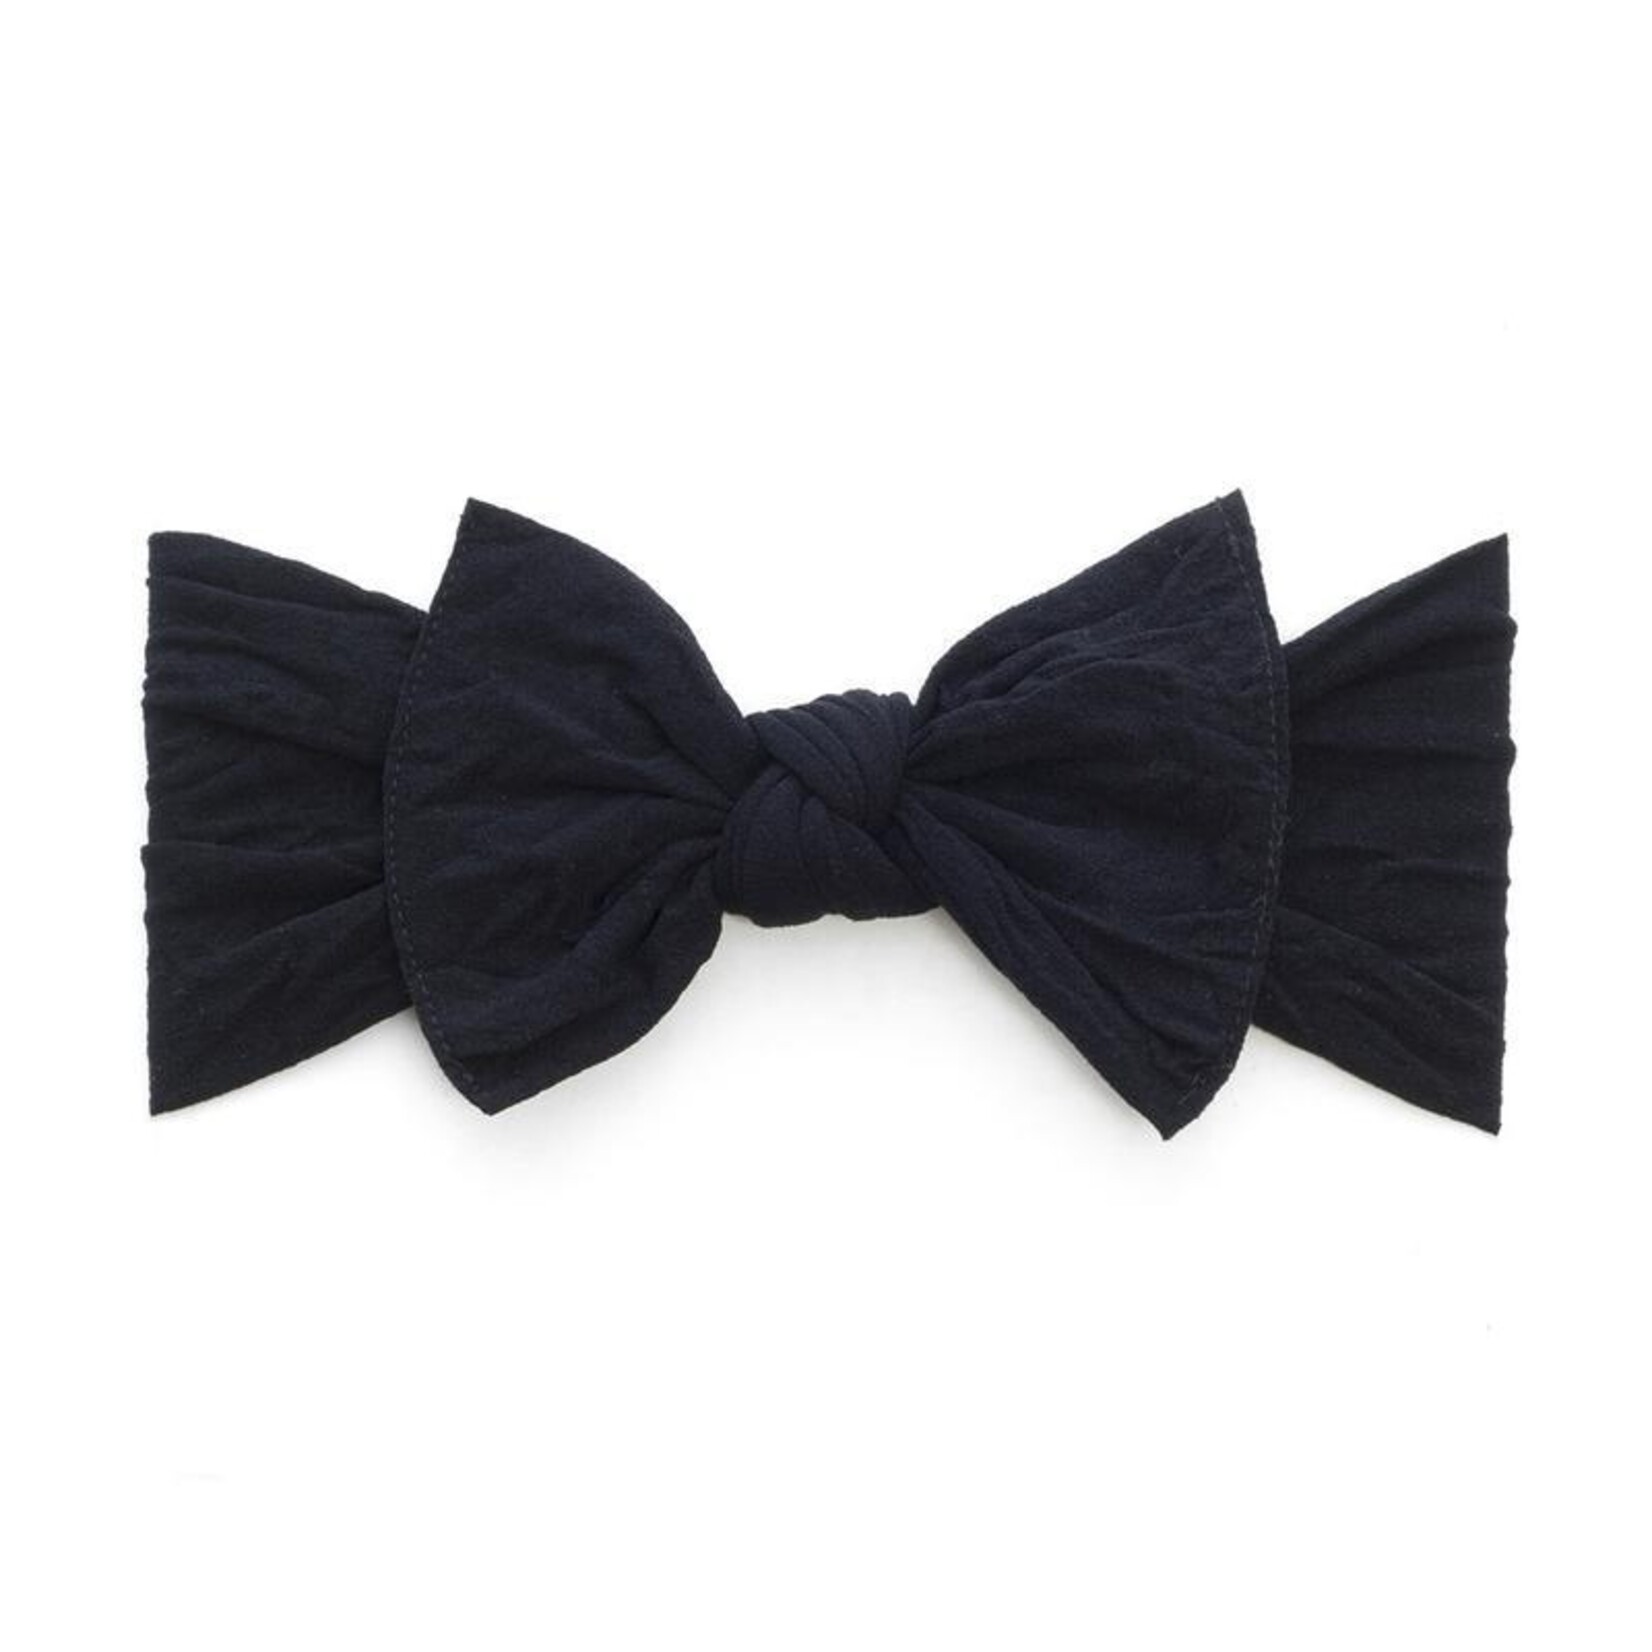 Baby Bling Bows Knot - Black